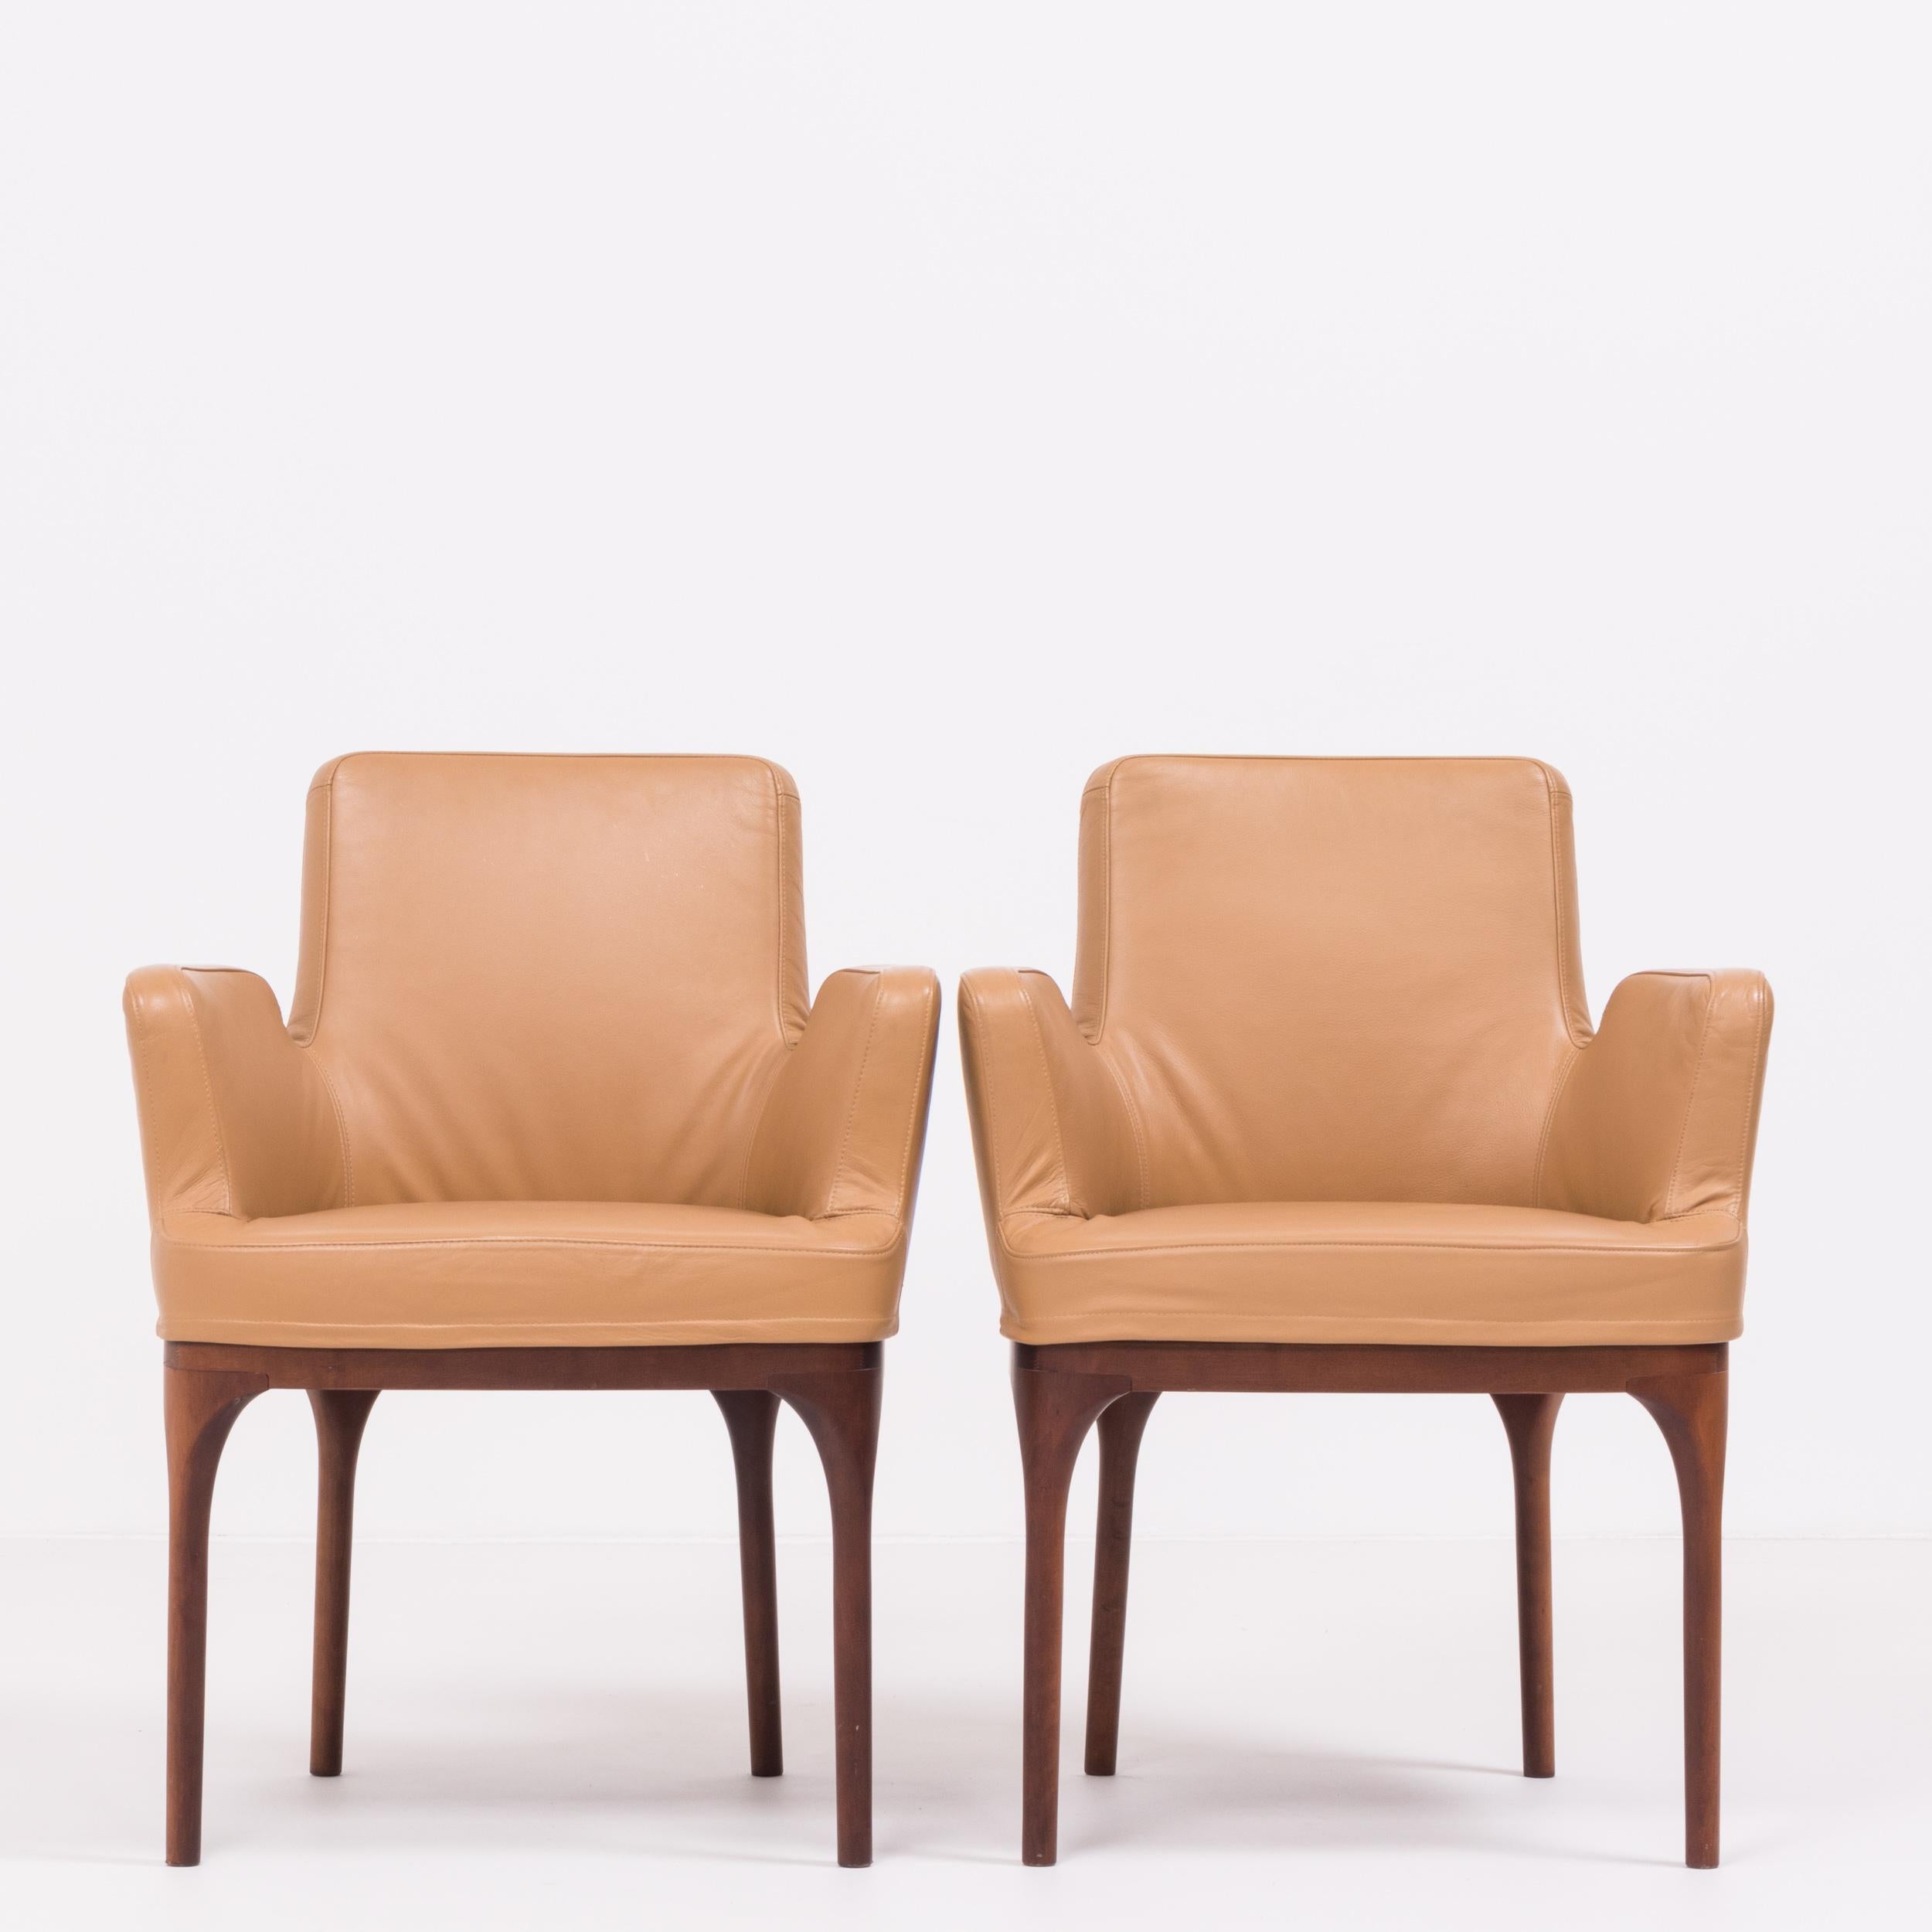 A stunning example of Mid-Century Modern design, this set of two dining chairs were manufactured by Porada and are in excellent condition.

With a deep bucket shape and squared arms, the chairs are upholstered in soft toffee brown colored leather